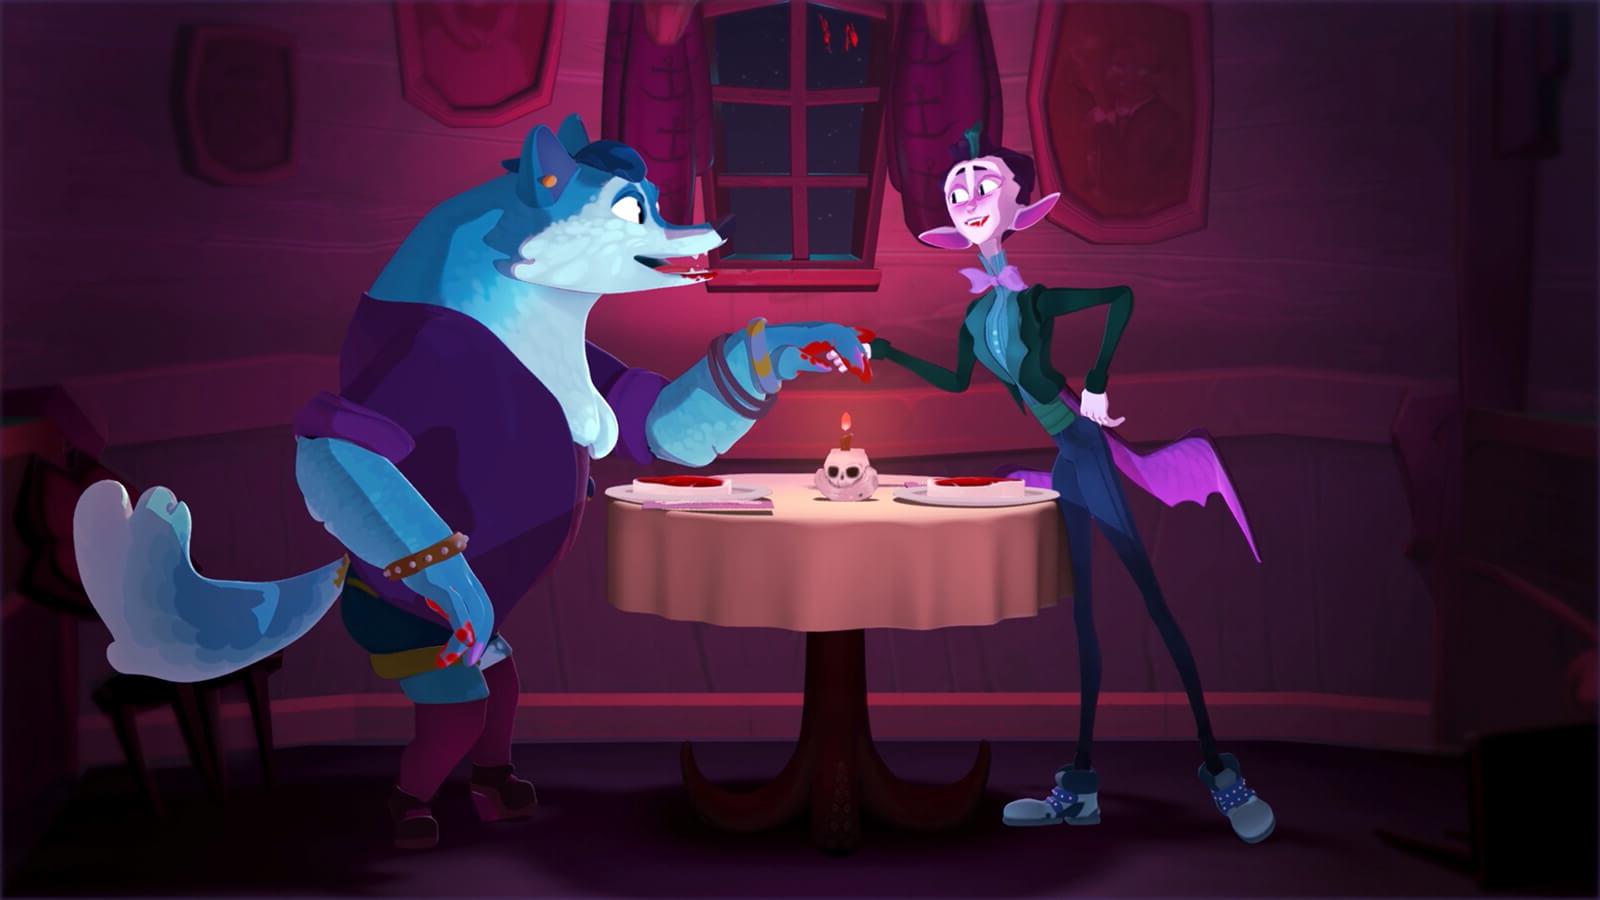 A pink vampire in a suit holds hands with a blue werewolf over a dinner table with two steaks and a lit candle inside a skull